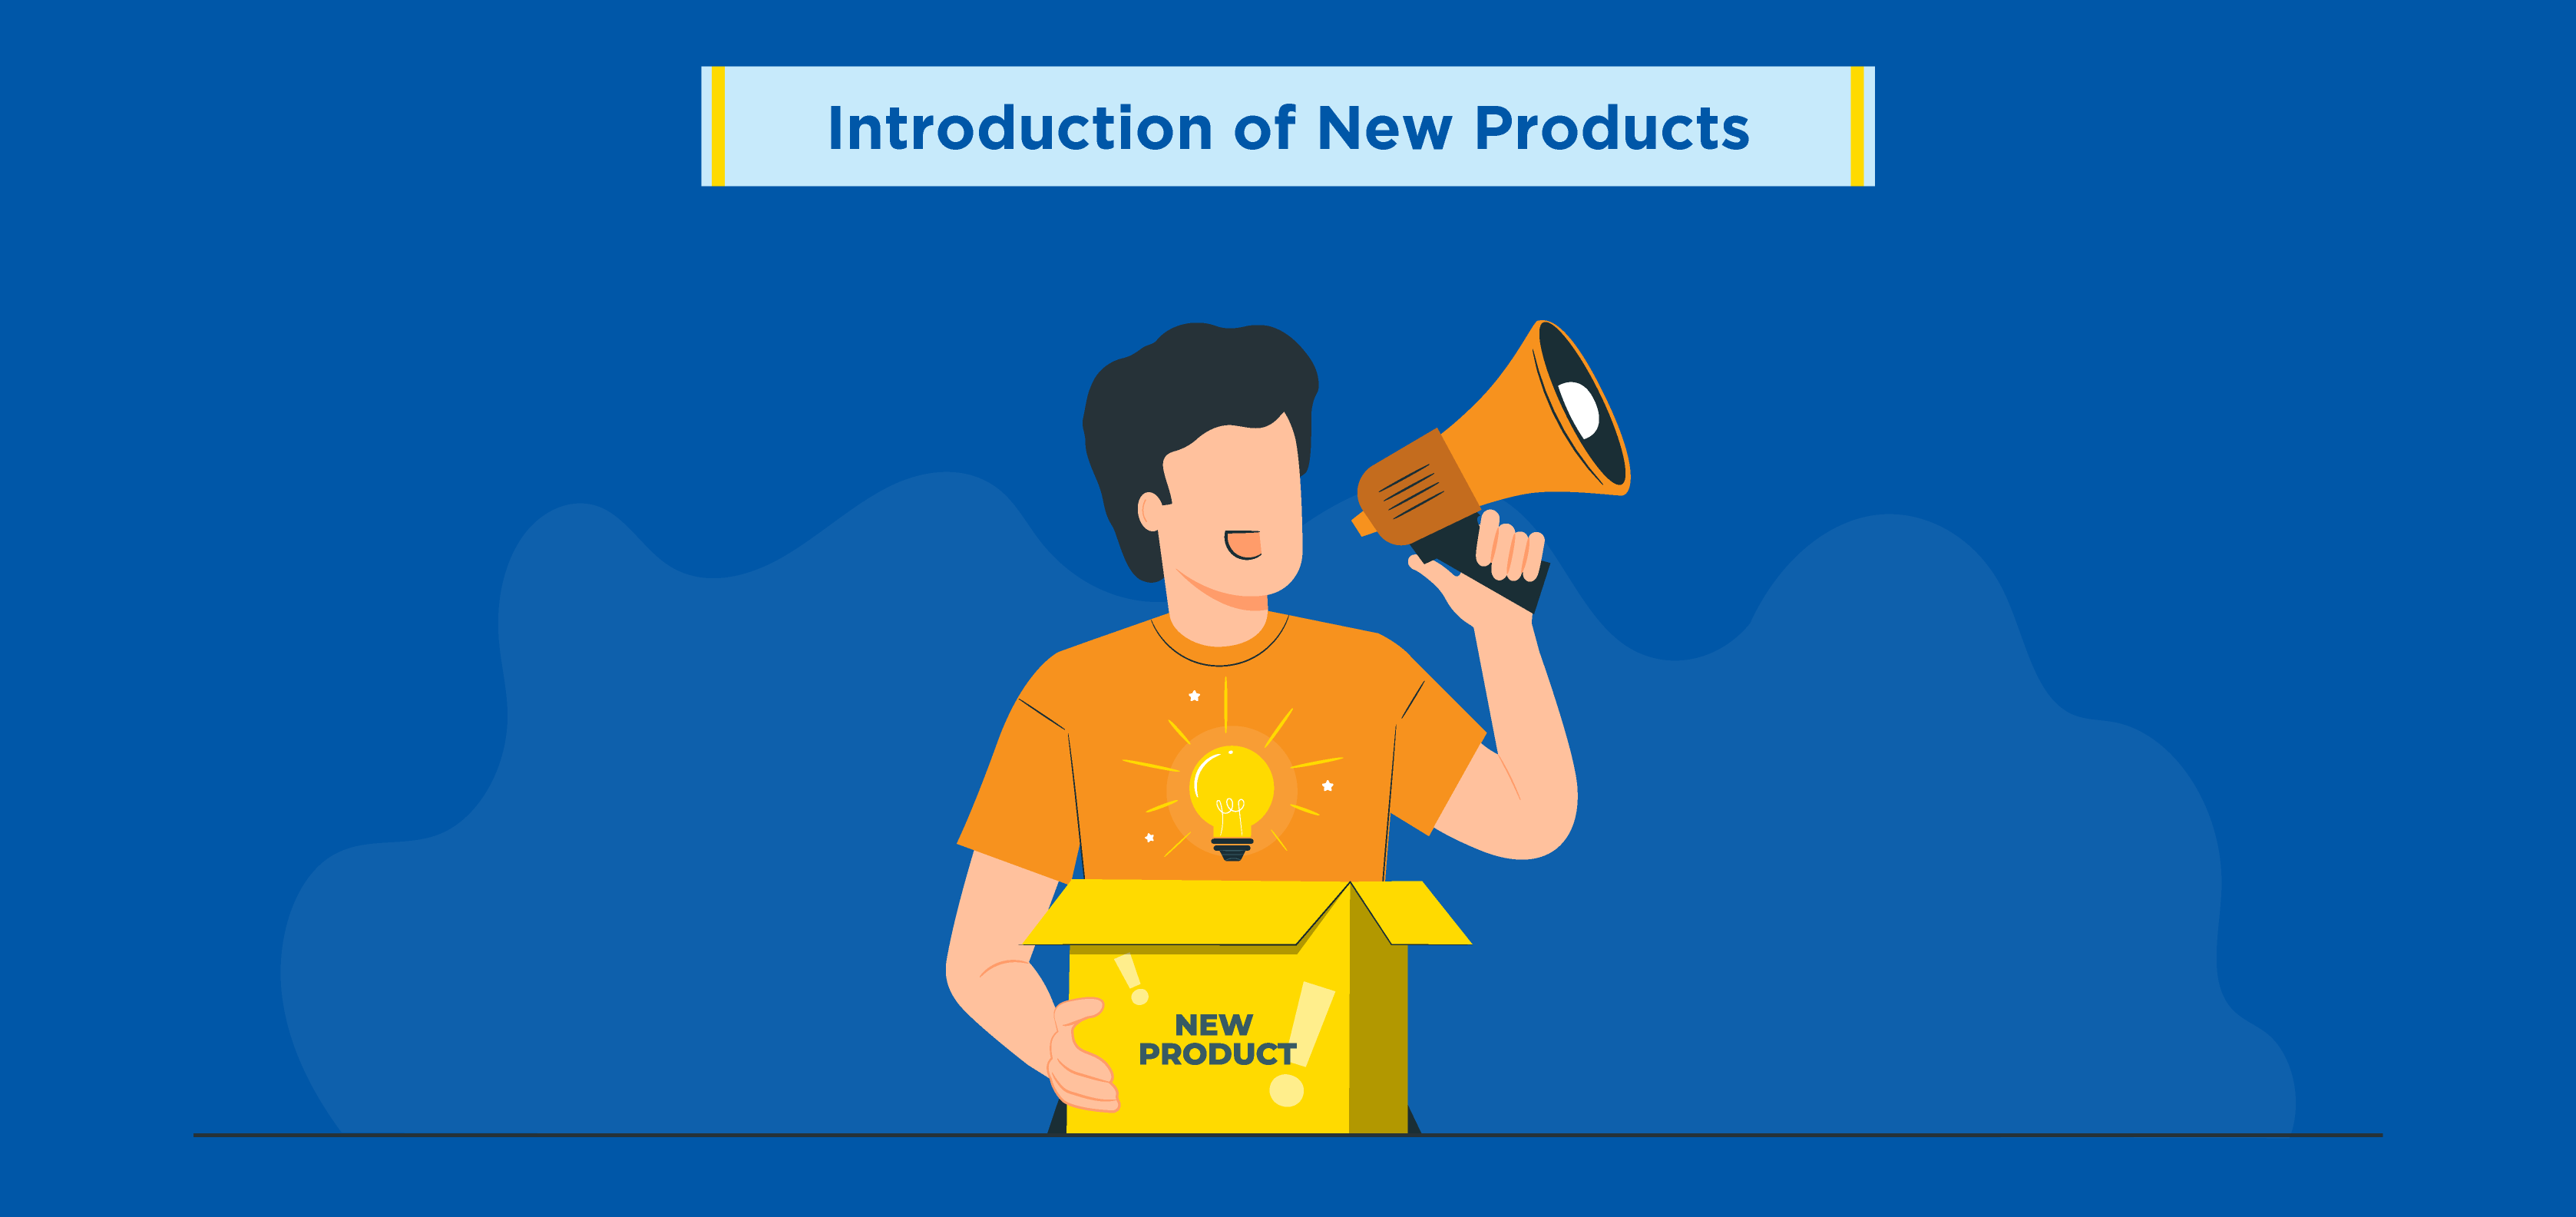 Introduction of New Products